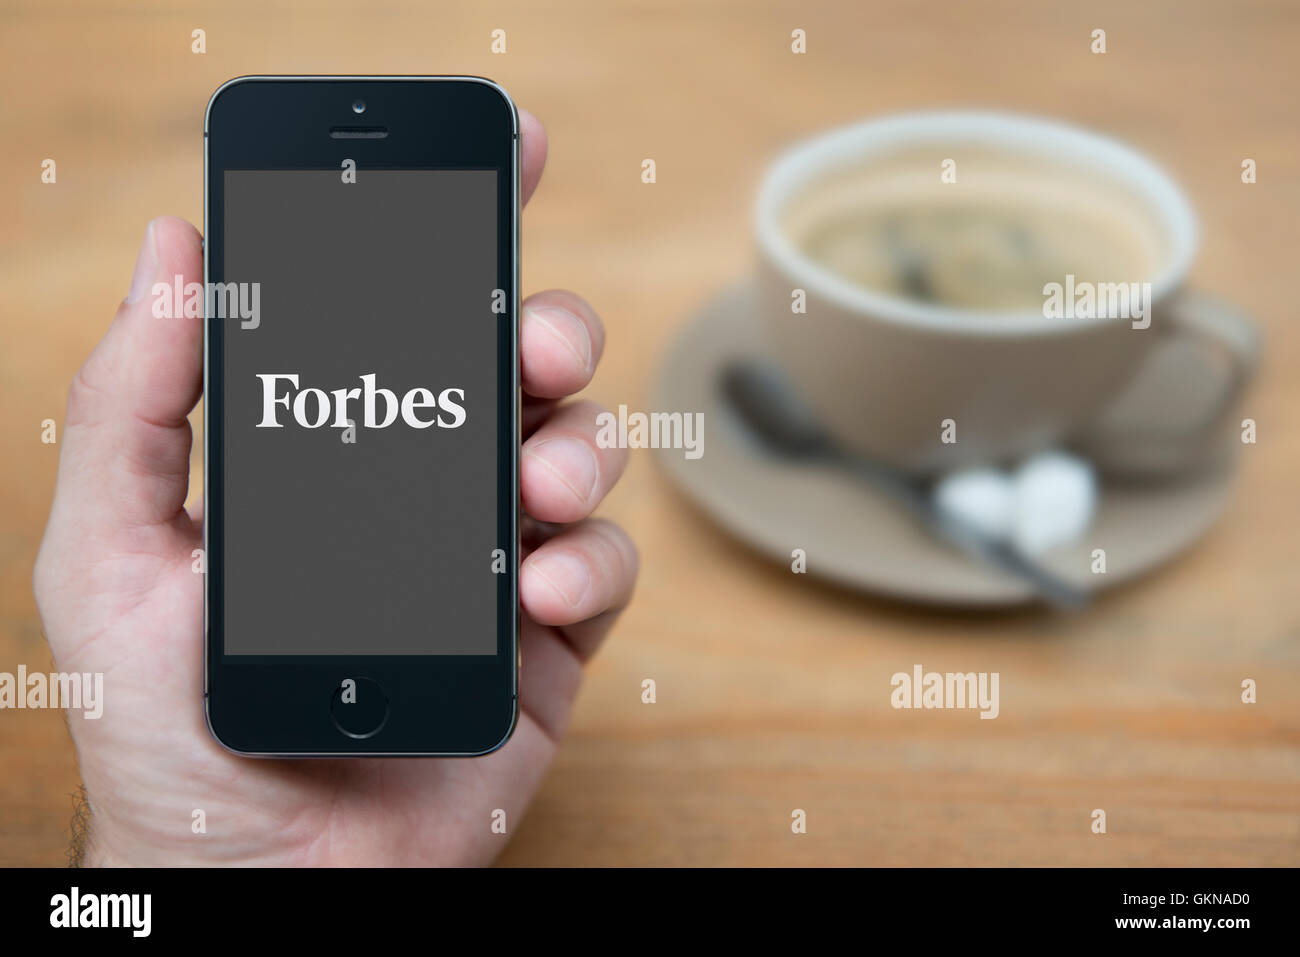 A man looks at his iPhone which displays the Forbes logo, while sat with a cup of coffee (Editorial use only). Stock Photo